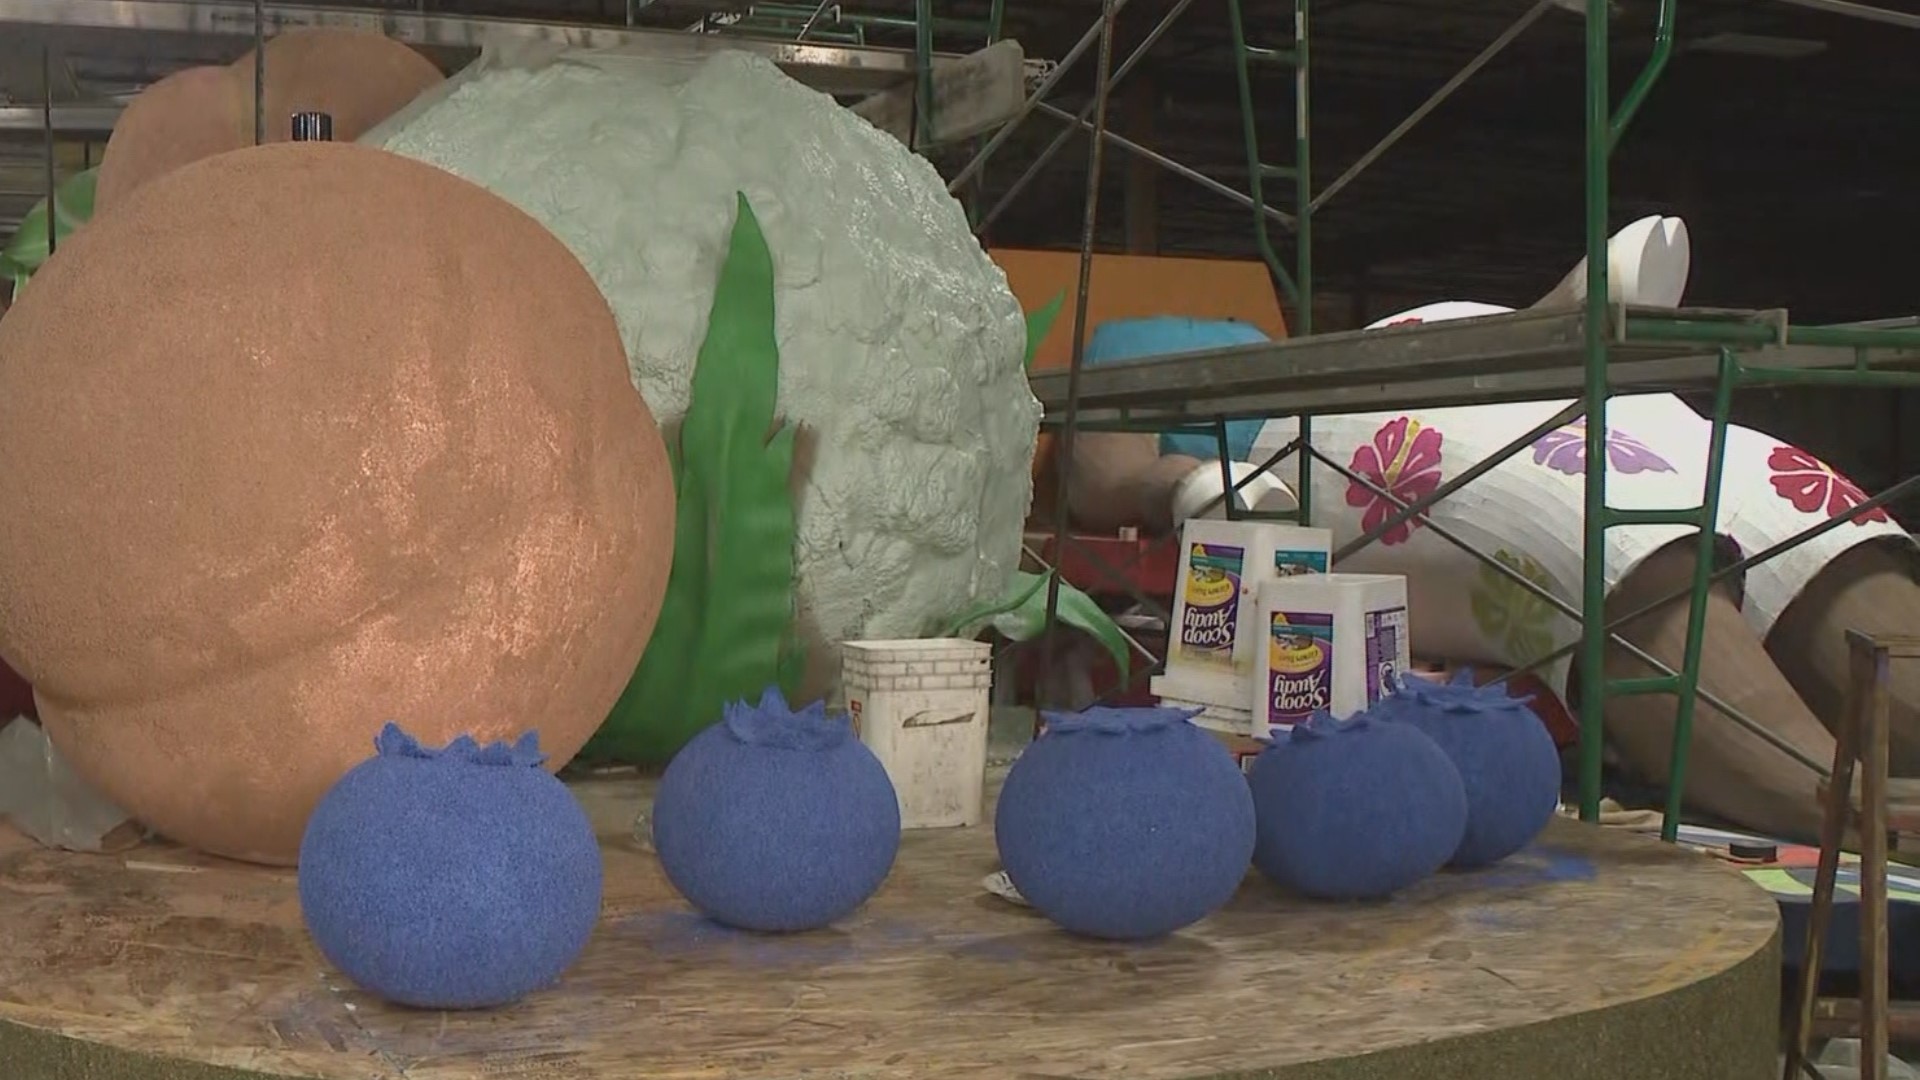 The Grand Floral Parade will make its way through Portland's east side this Saturday. KGW Sunrise anchor and reporter Drew Carney got a sneak peak of the floats.